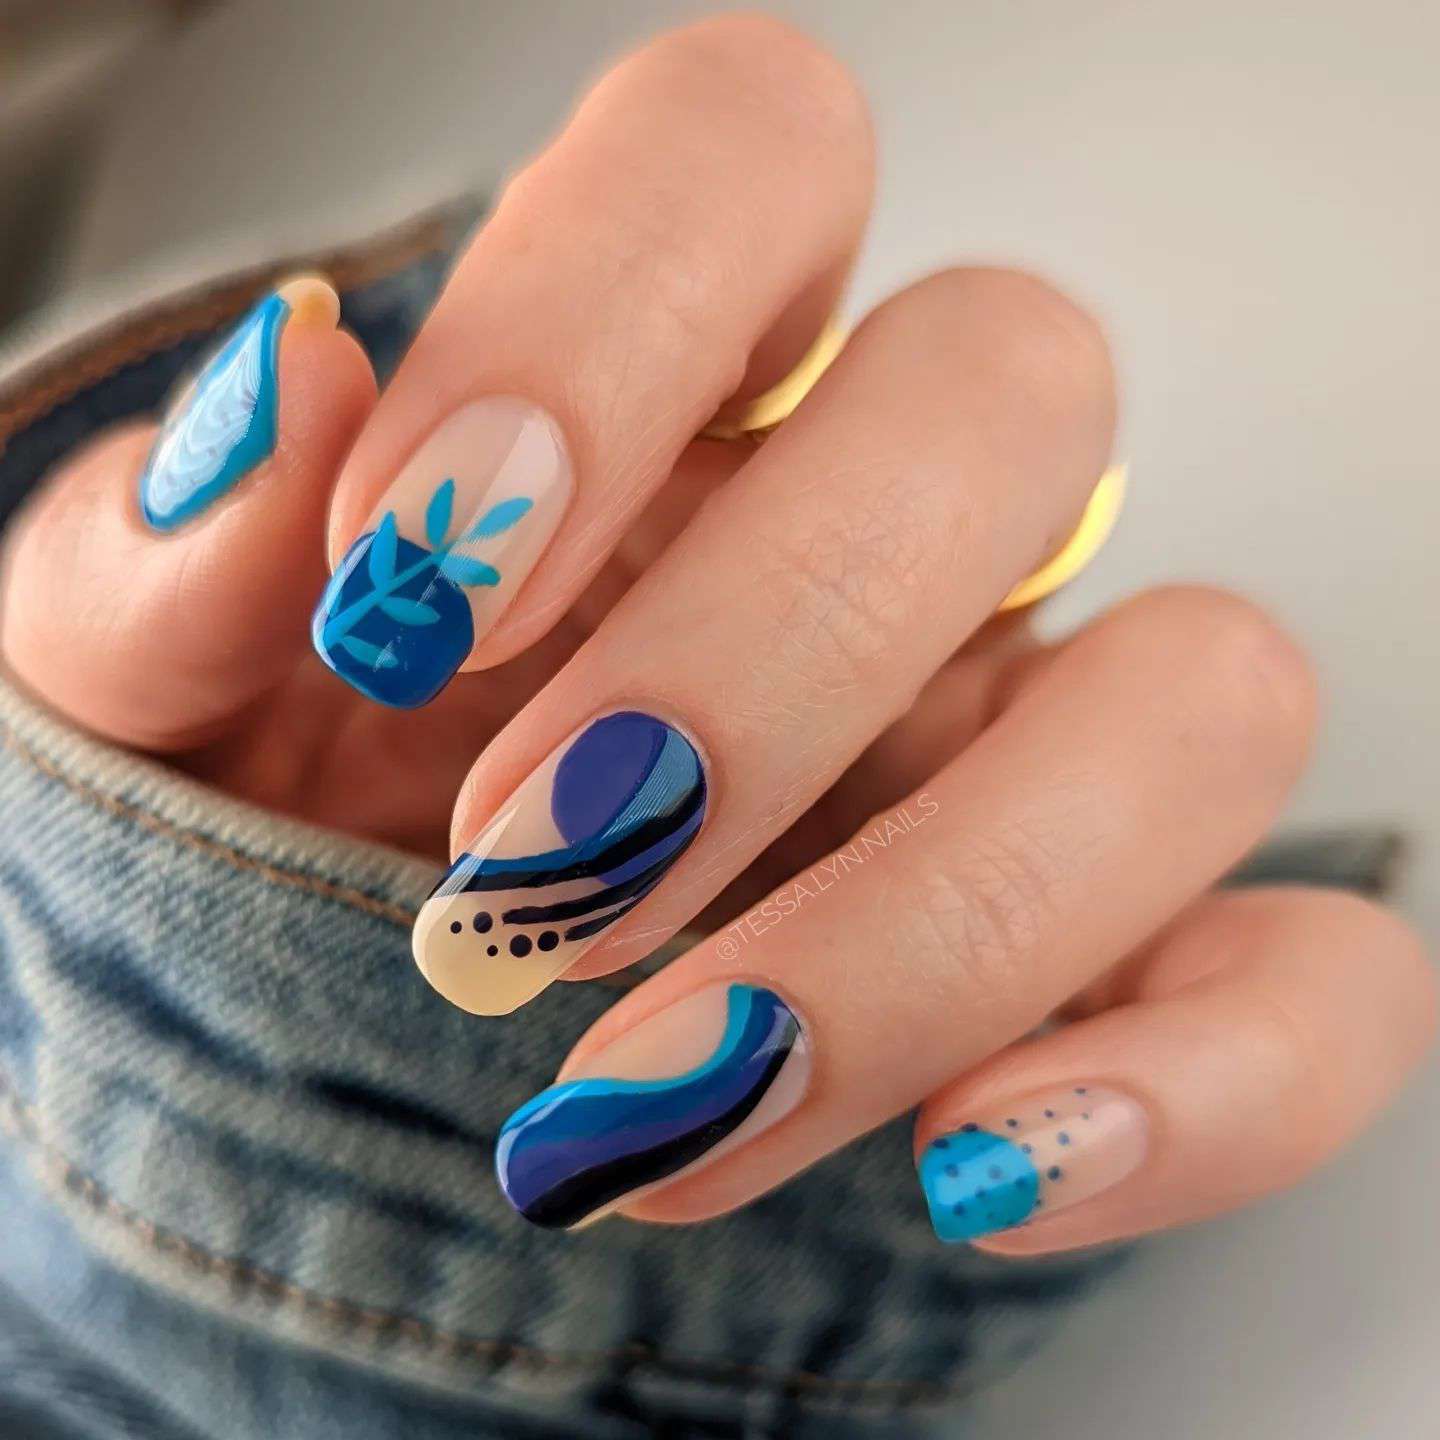 100+ Prettiest Fall Nail Designs And Ideas To Try In 2022 images 59